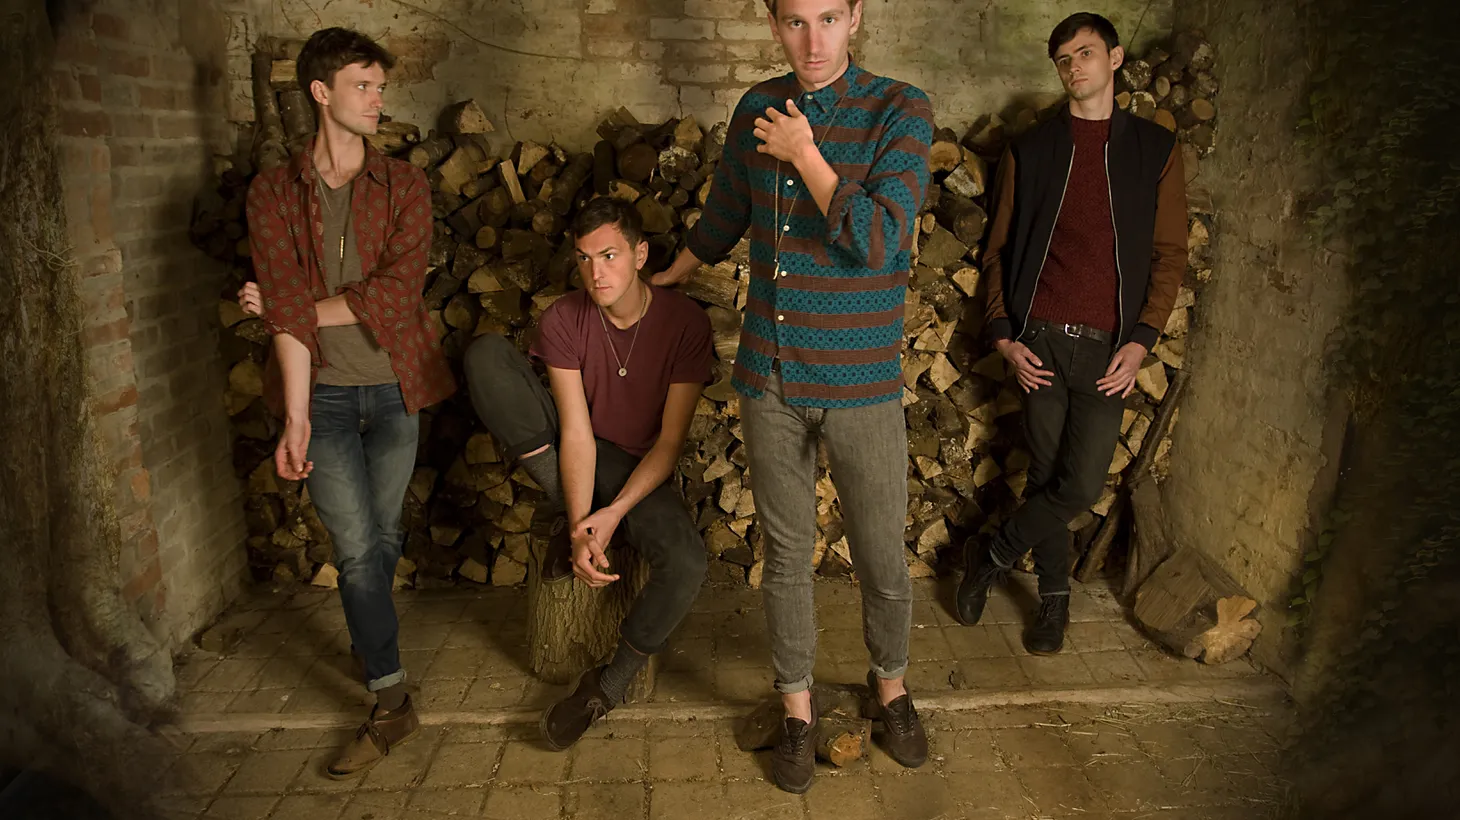 UK band Glass Animals caught our ear early on with their dreamy, synthy pop songs. Their debut has been a favorite on our airwaves and we’ll get to experience their sound live on Morning Becomes Eclectic.